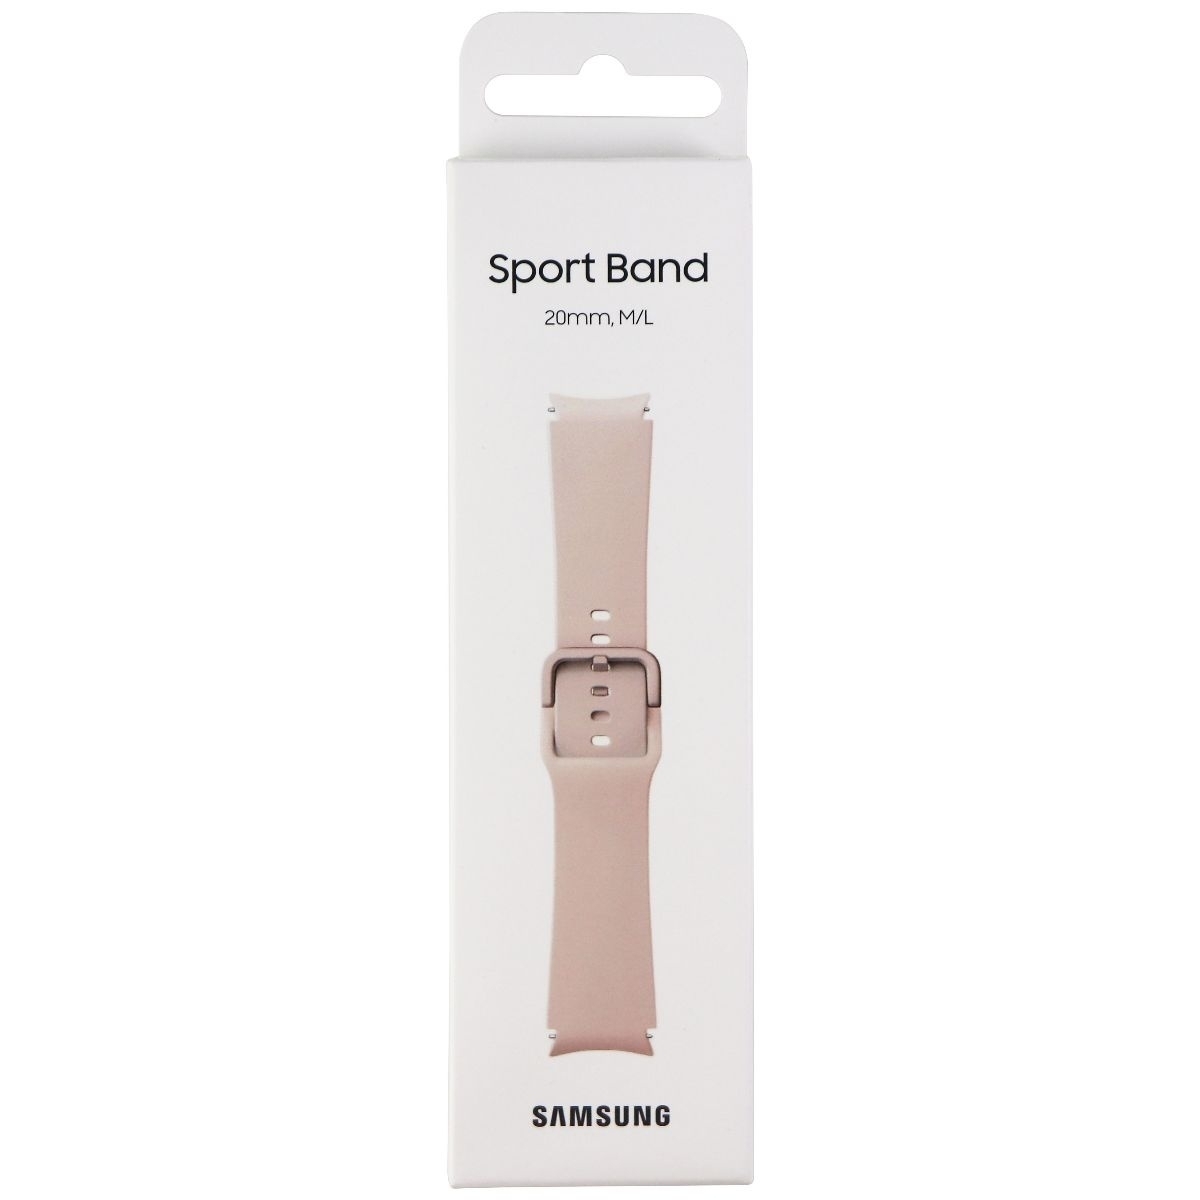 Samsung Sport Band For Galaxy Watch4 & Watch4 Classic - Pink (20mm) Medium/Large